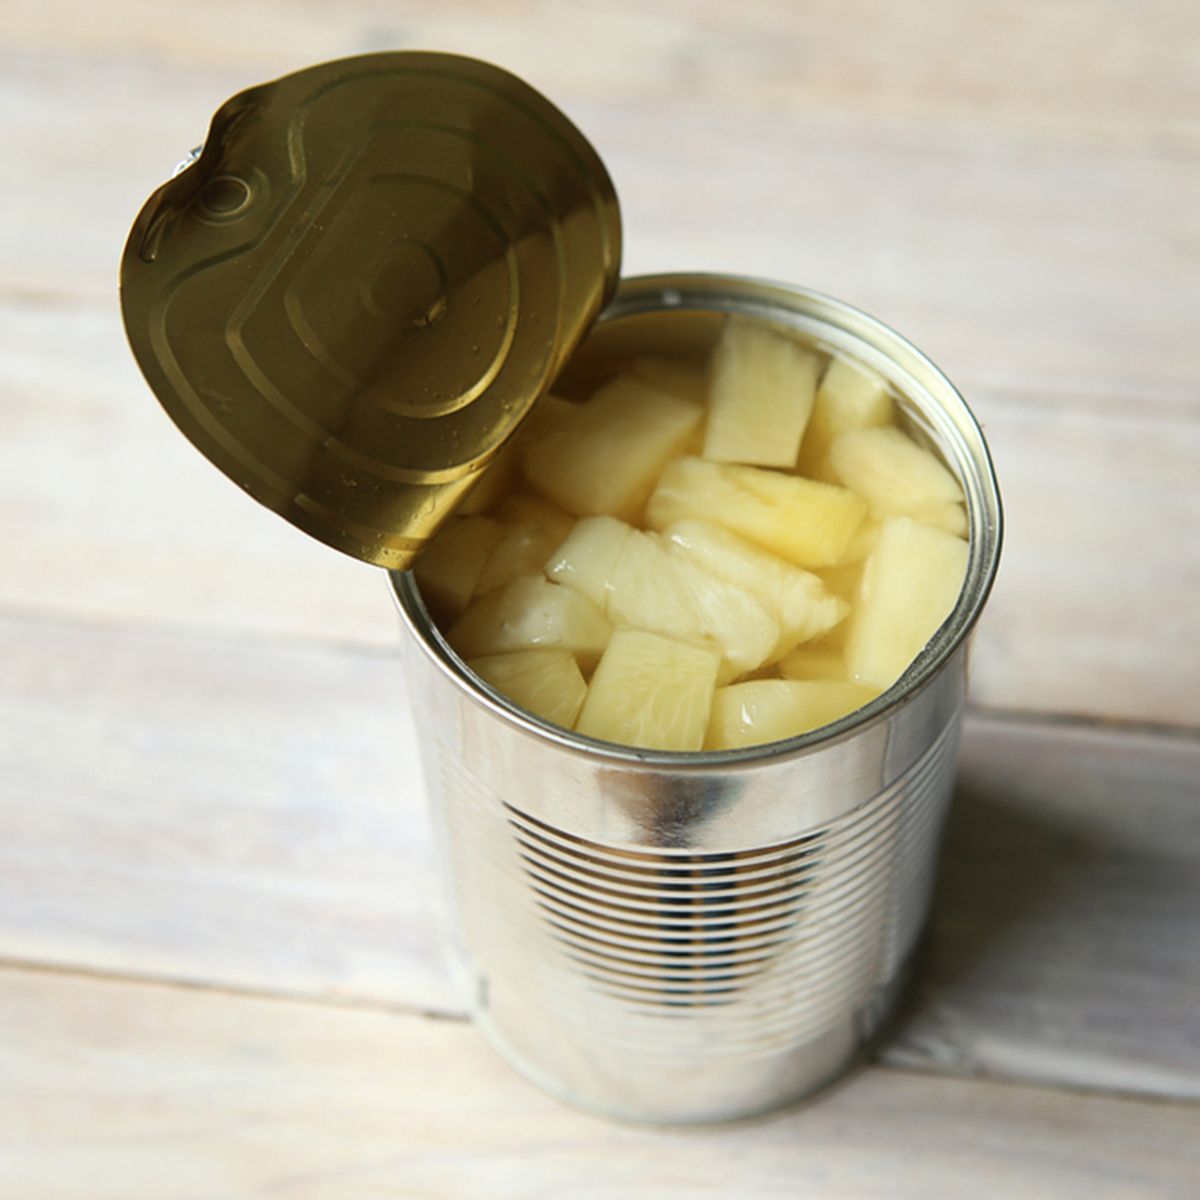 Opened tin can of canned pineapple pieces. Canned pineapple in can on wooden table.; Shutterstock ID 709601191; Job (TFH, TOH, RD, BNB, CWM, CM): TOH